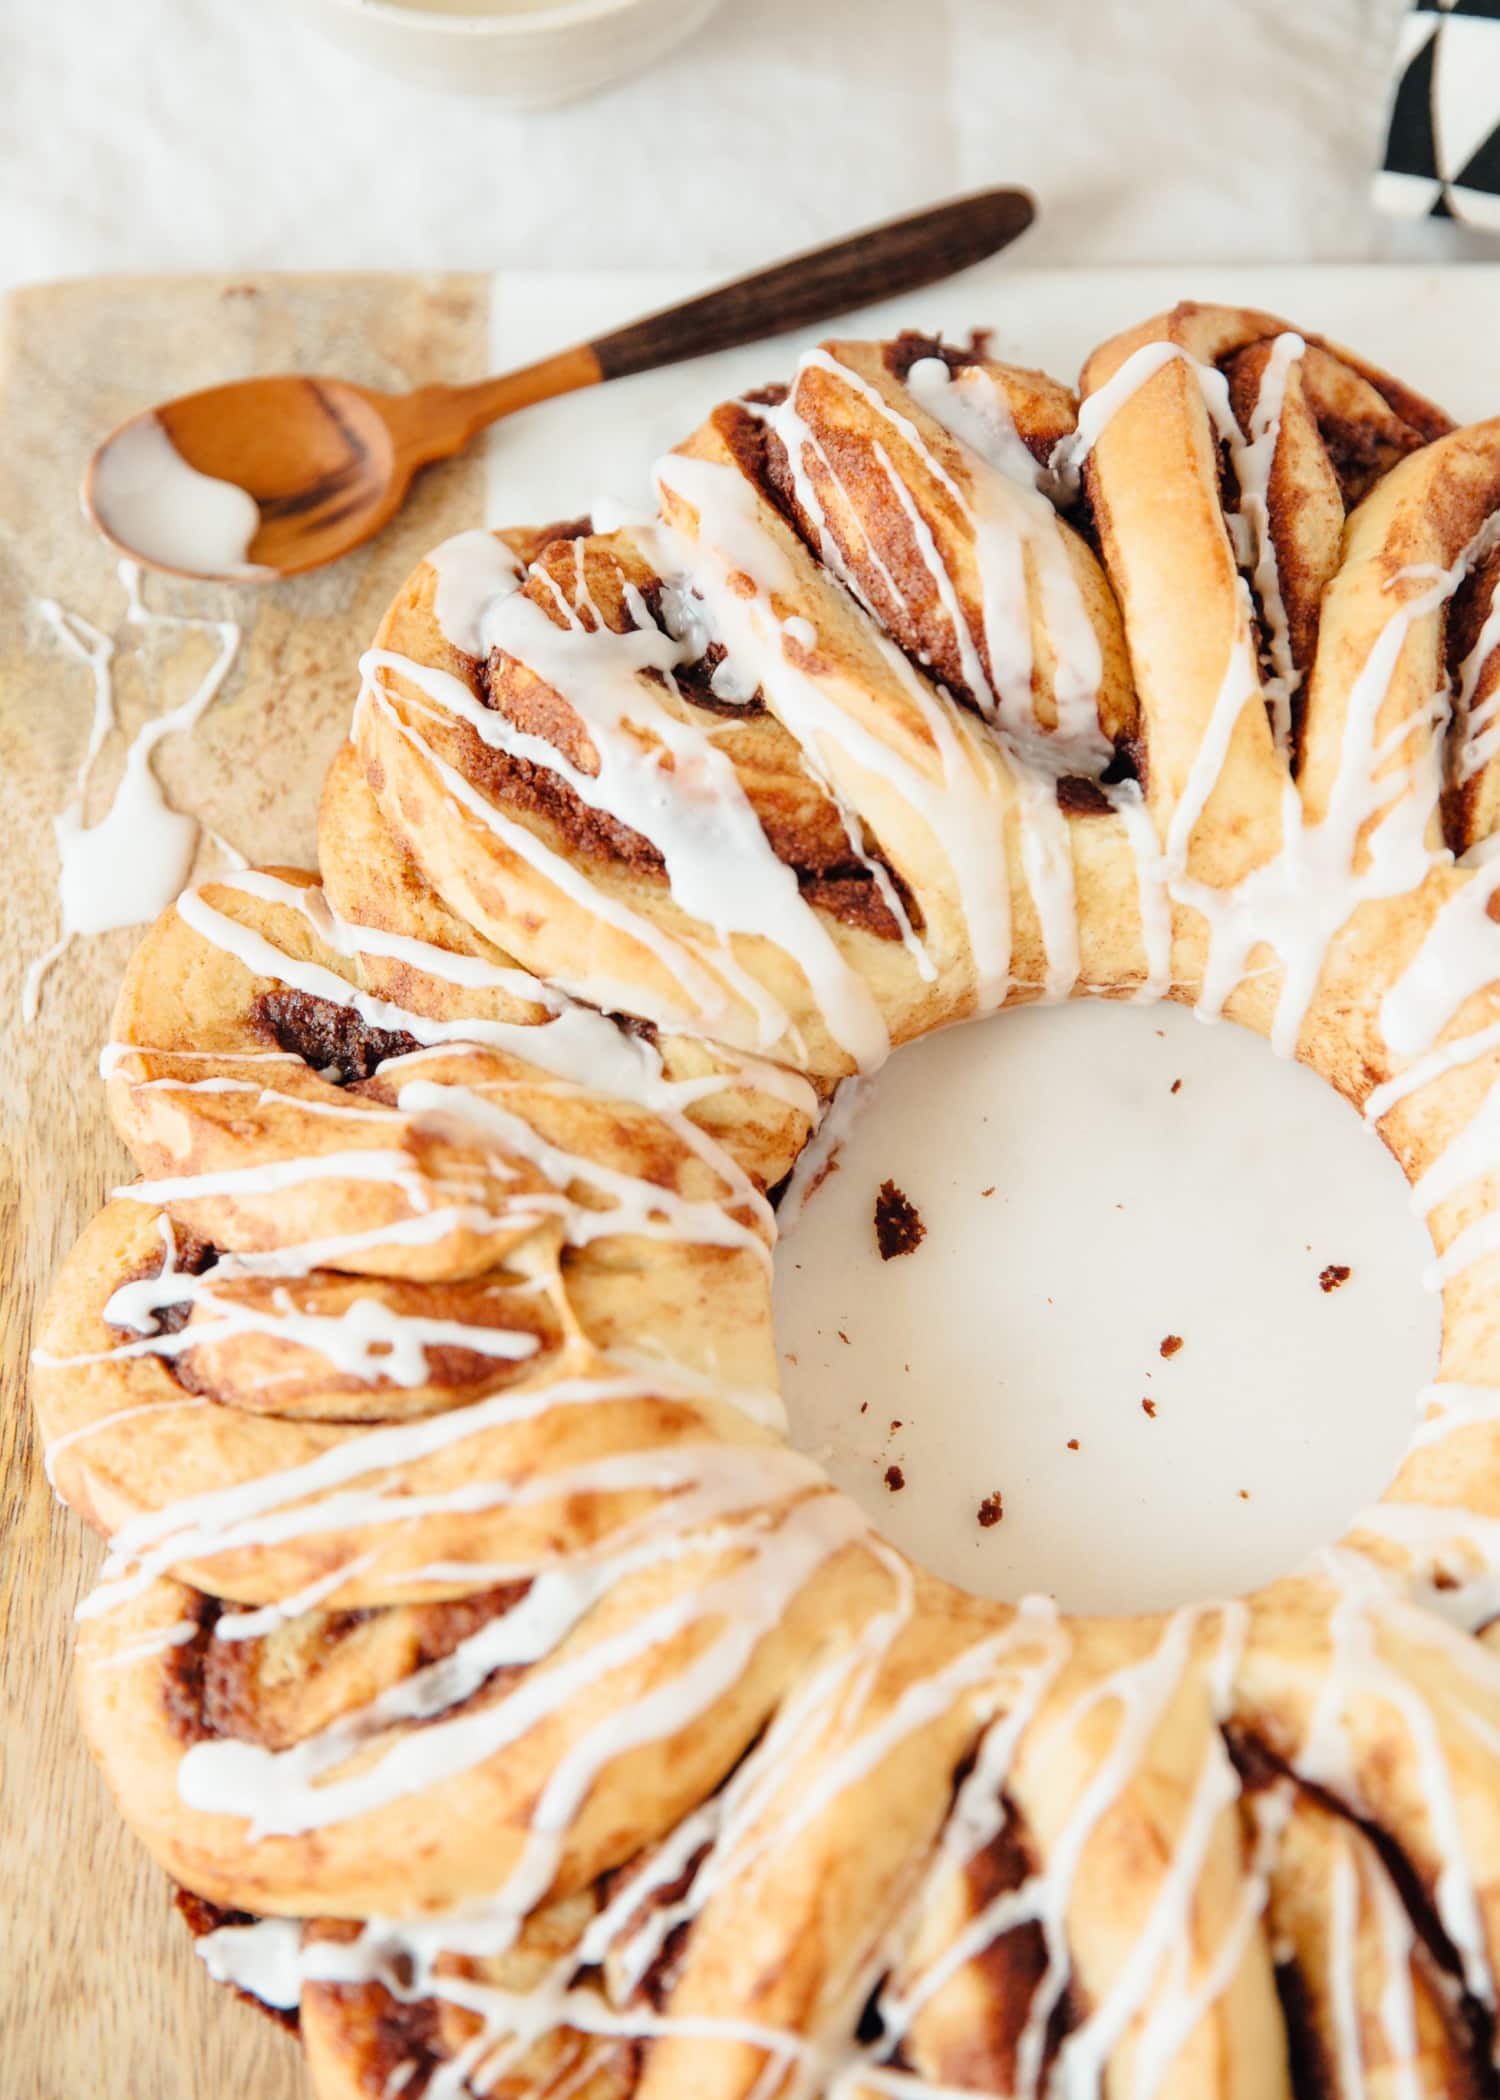 How To Make a Cinnamon Roll Wreath | Kitchn